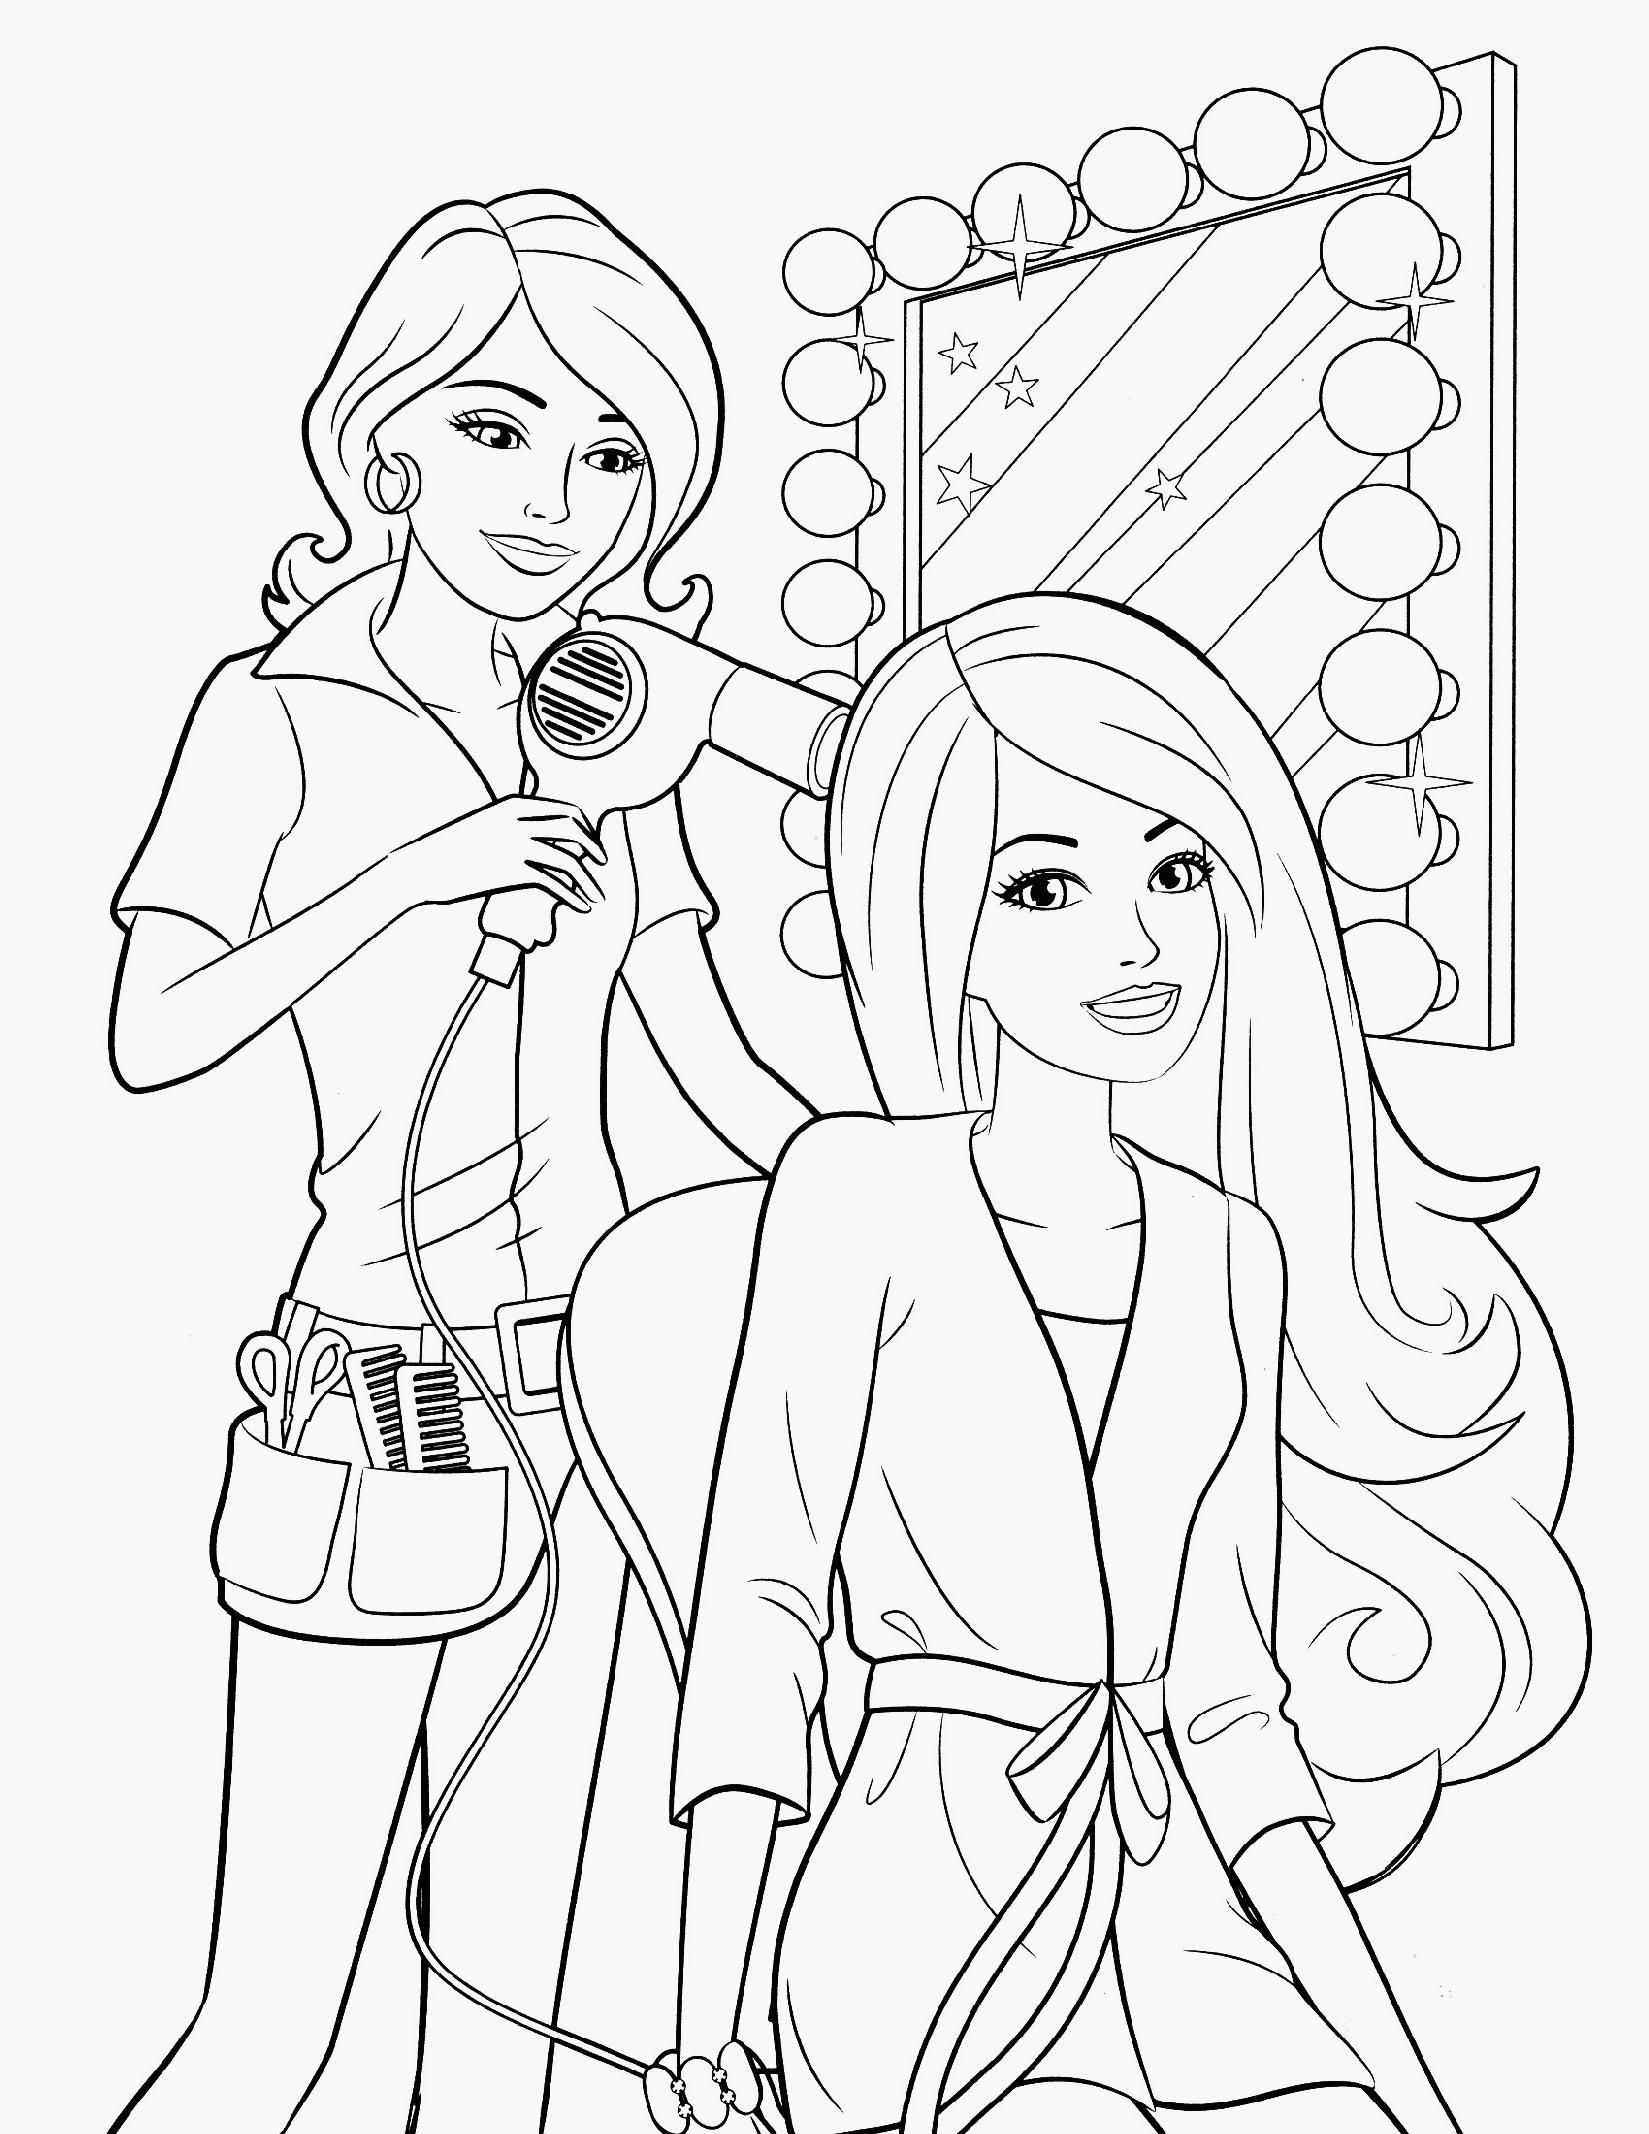 prom-dress-coloring-pictures-of-dress-clip-art-library